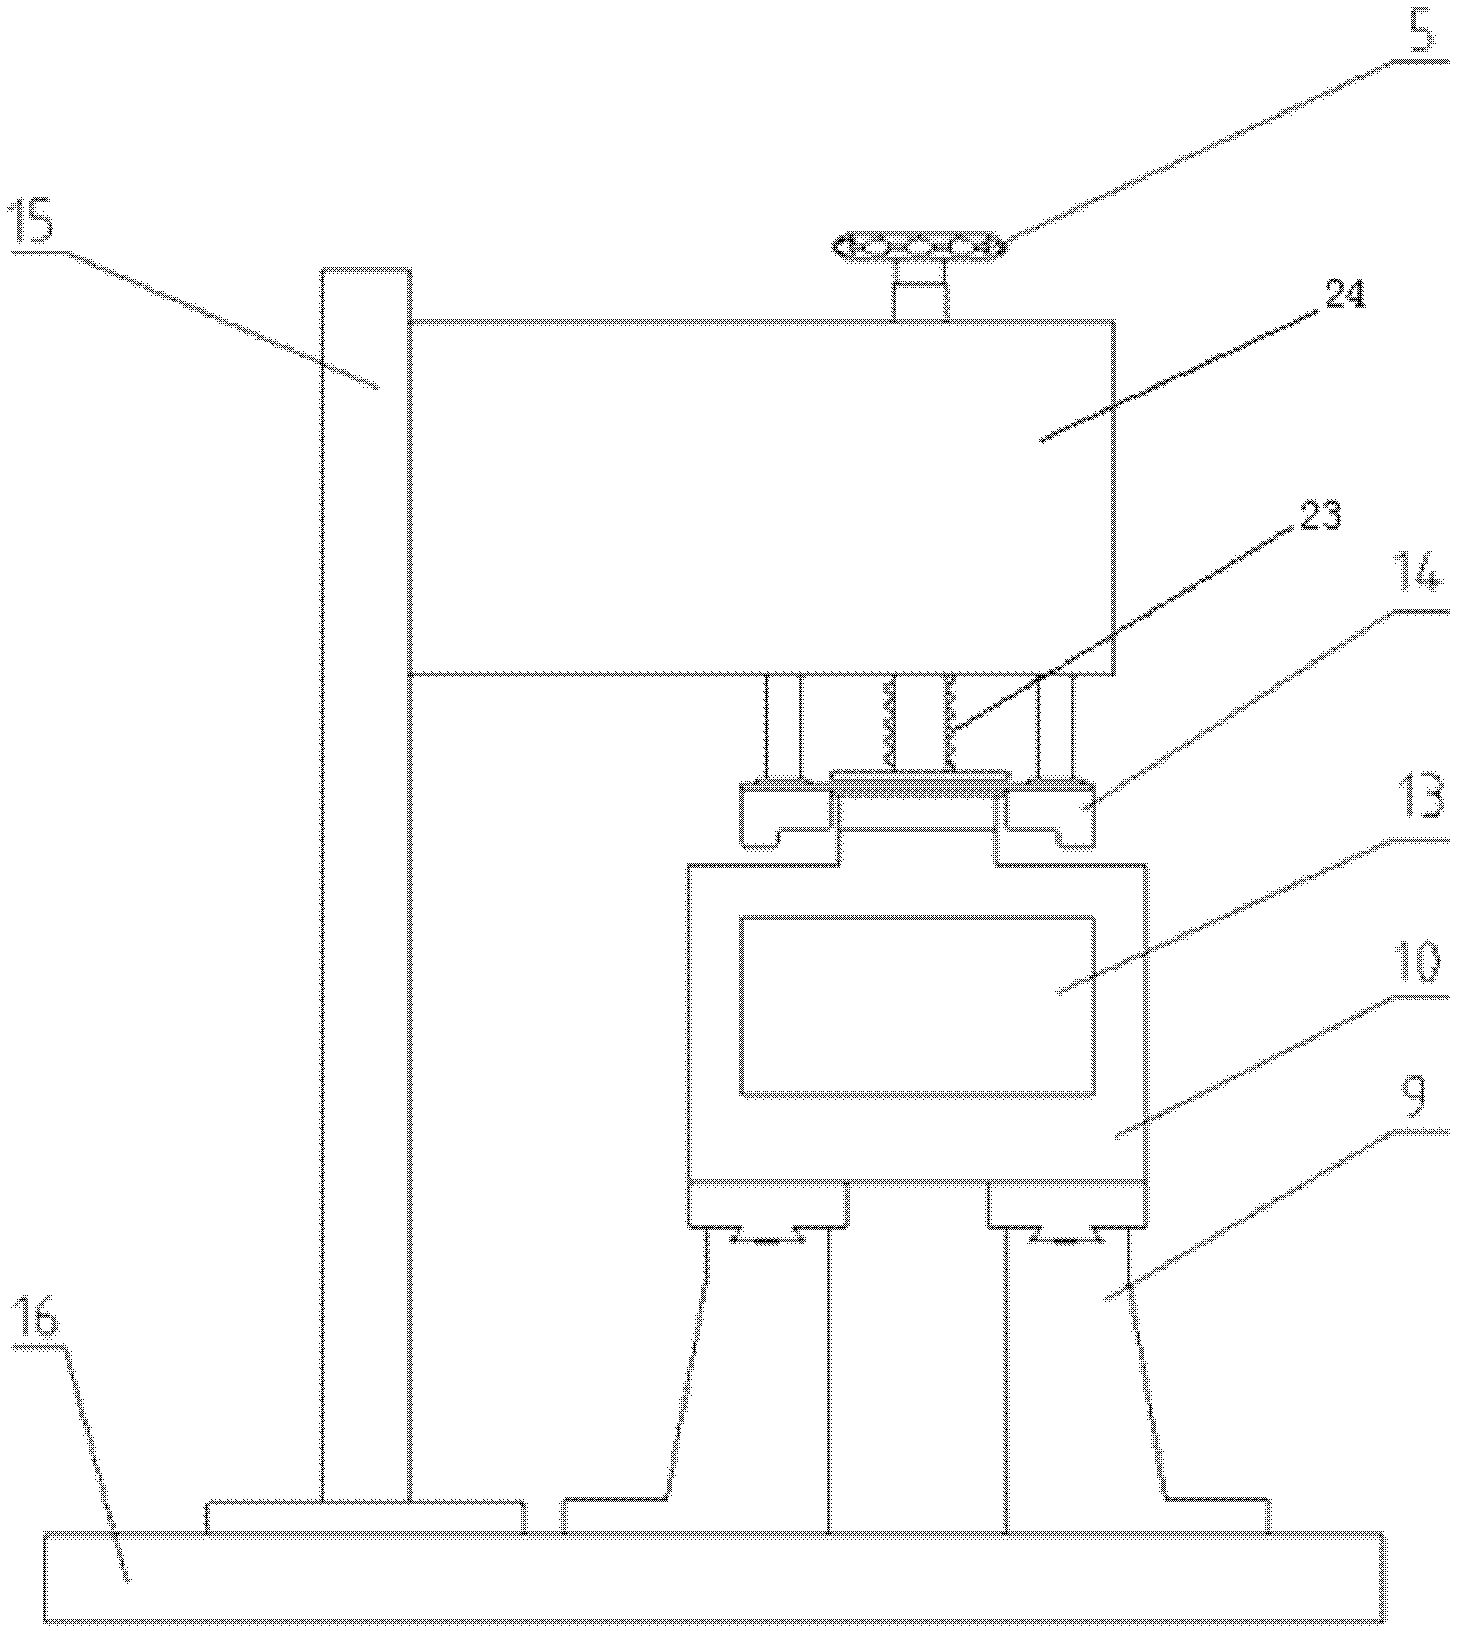 Rubber dynamic friction wear detection device